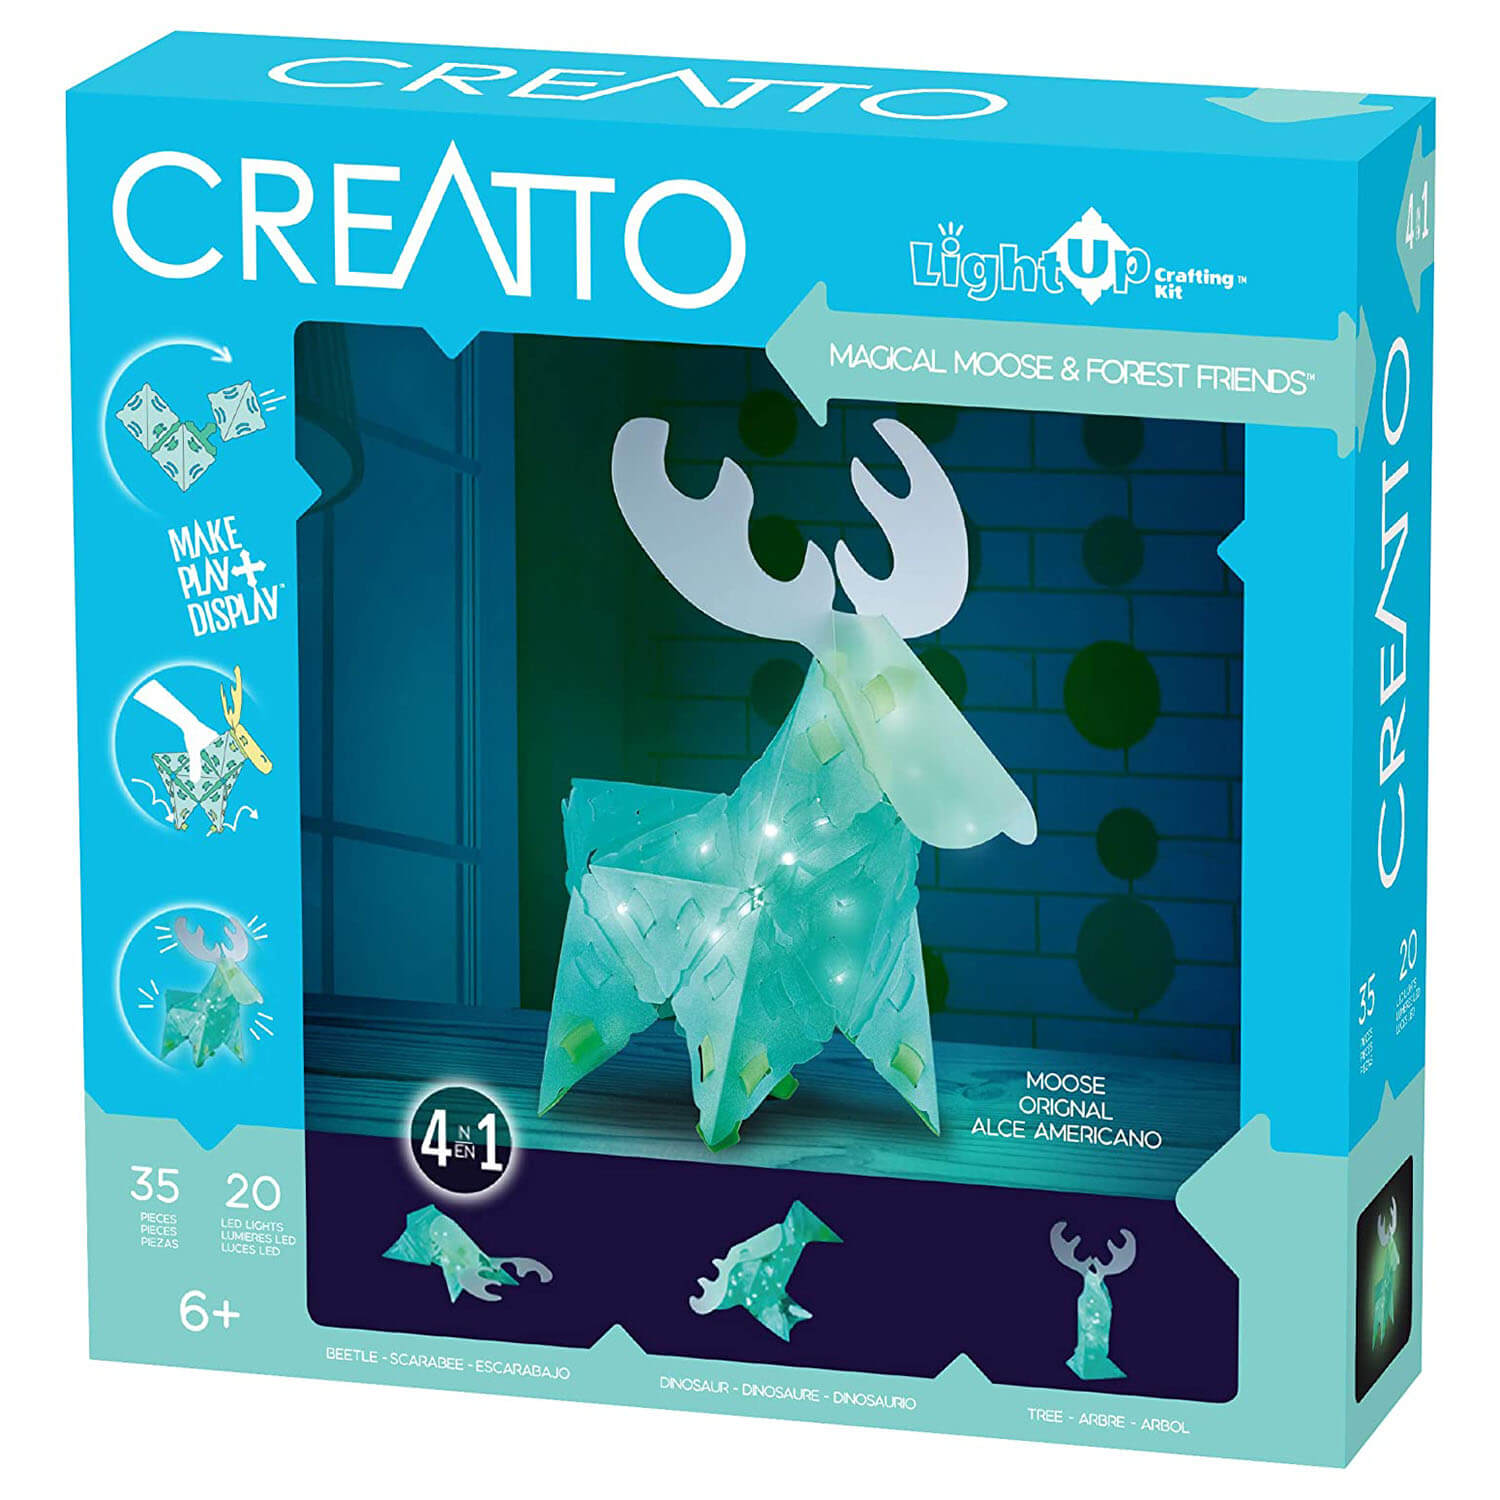 Thames and Kosmos Creatto: Magical Moose & Forest Friends Light-up Kit